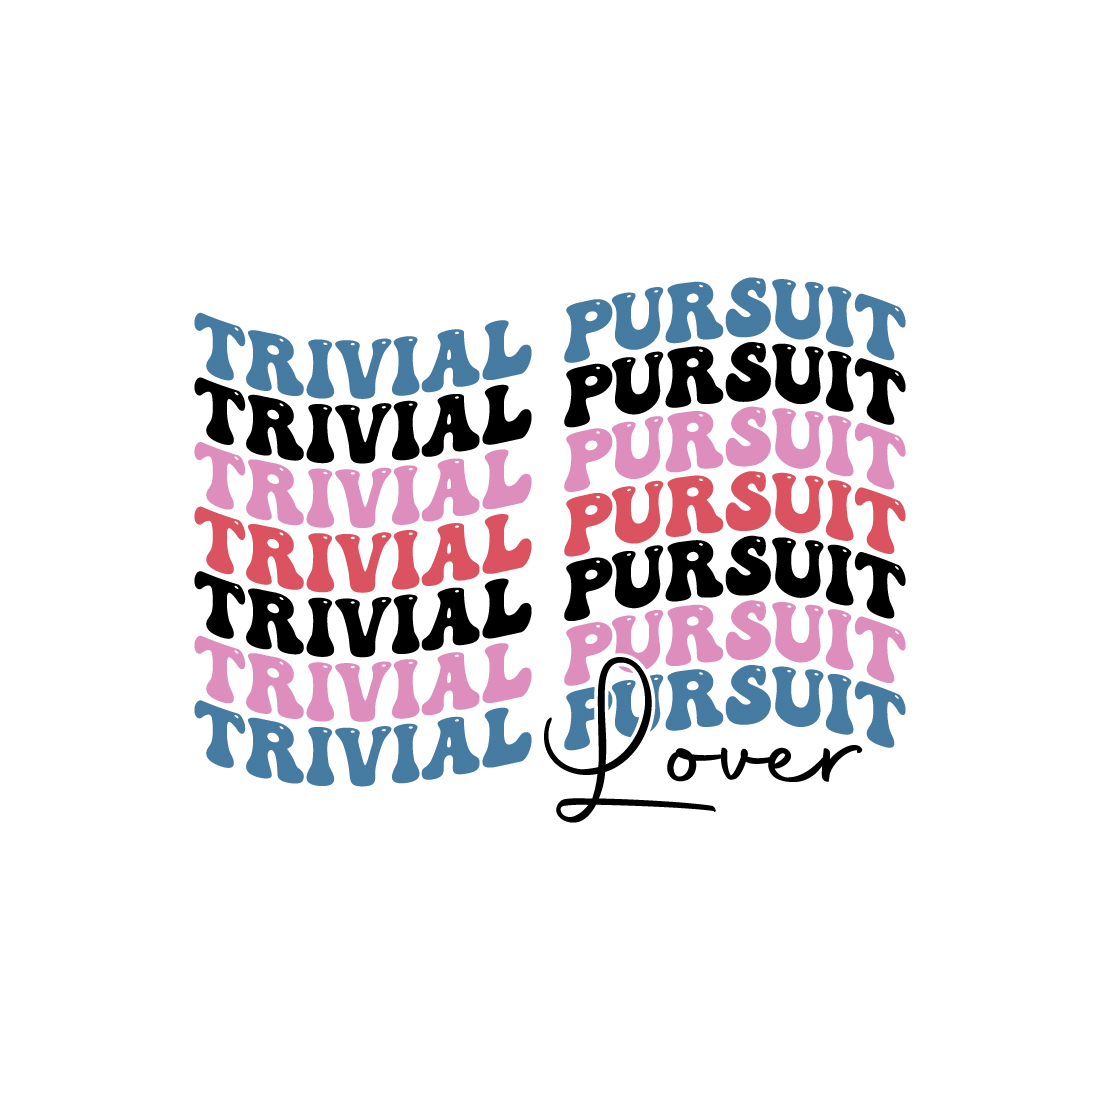 Trivial pursuit lover indoor game retro typography design for t-shirts, cards, frame artwork, phone cases, bags, mugs, stickers, tumblers, print, etc preview image.